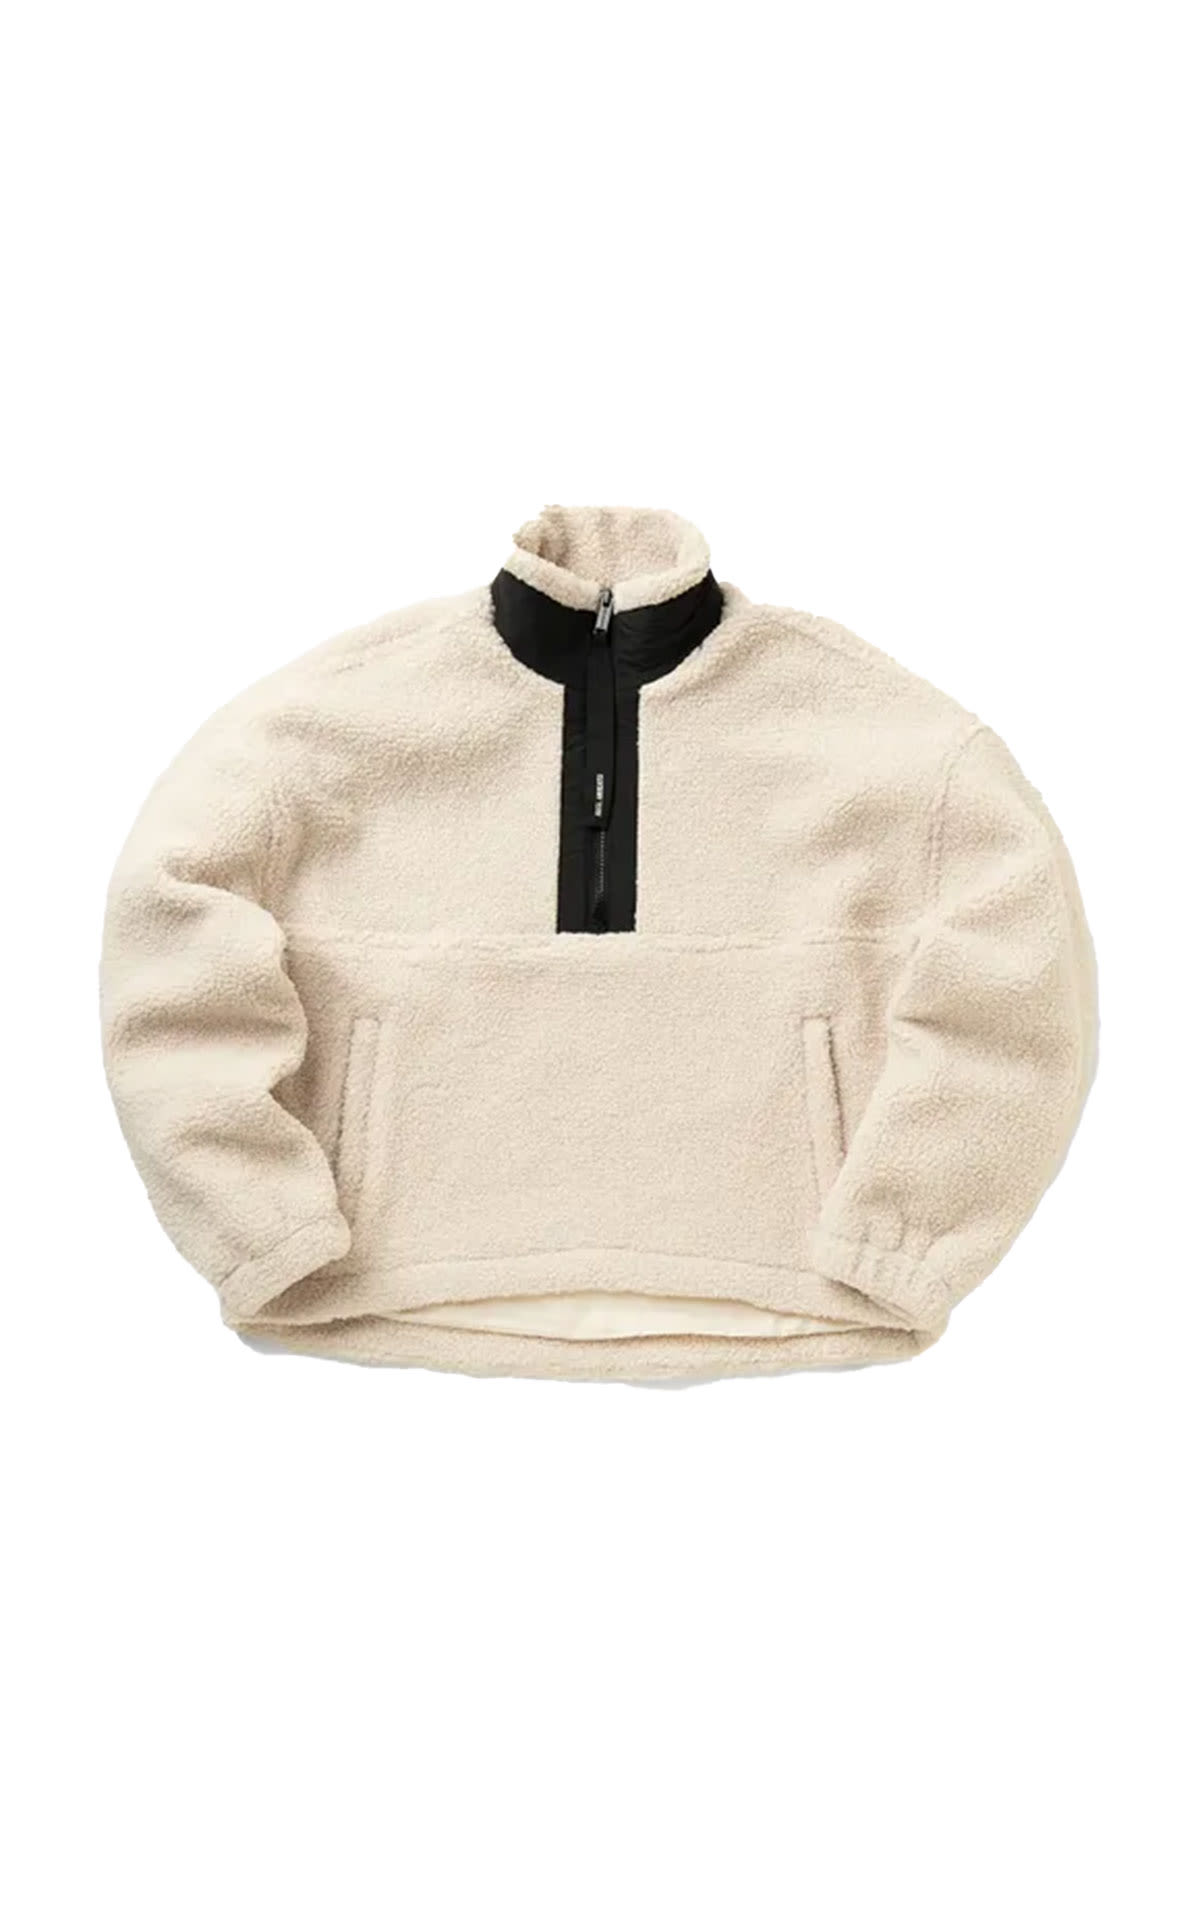 Axel Arigato Country fleece pullover from Bicester Village